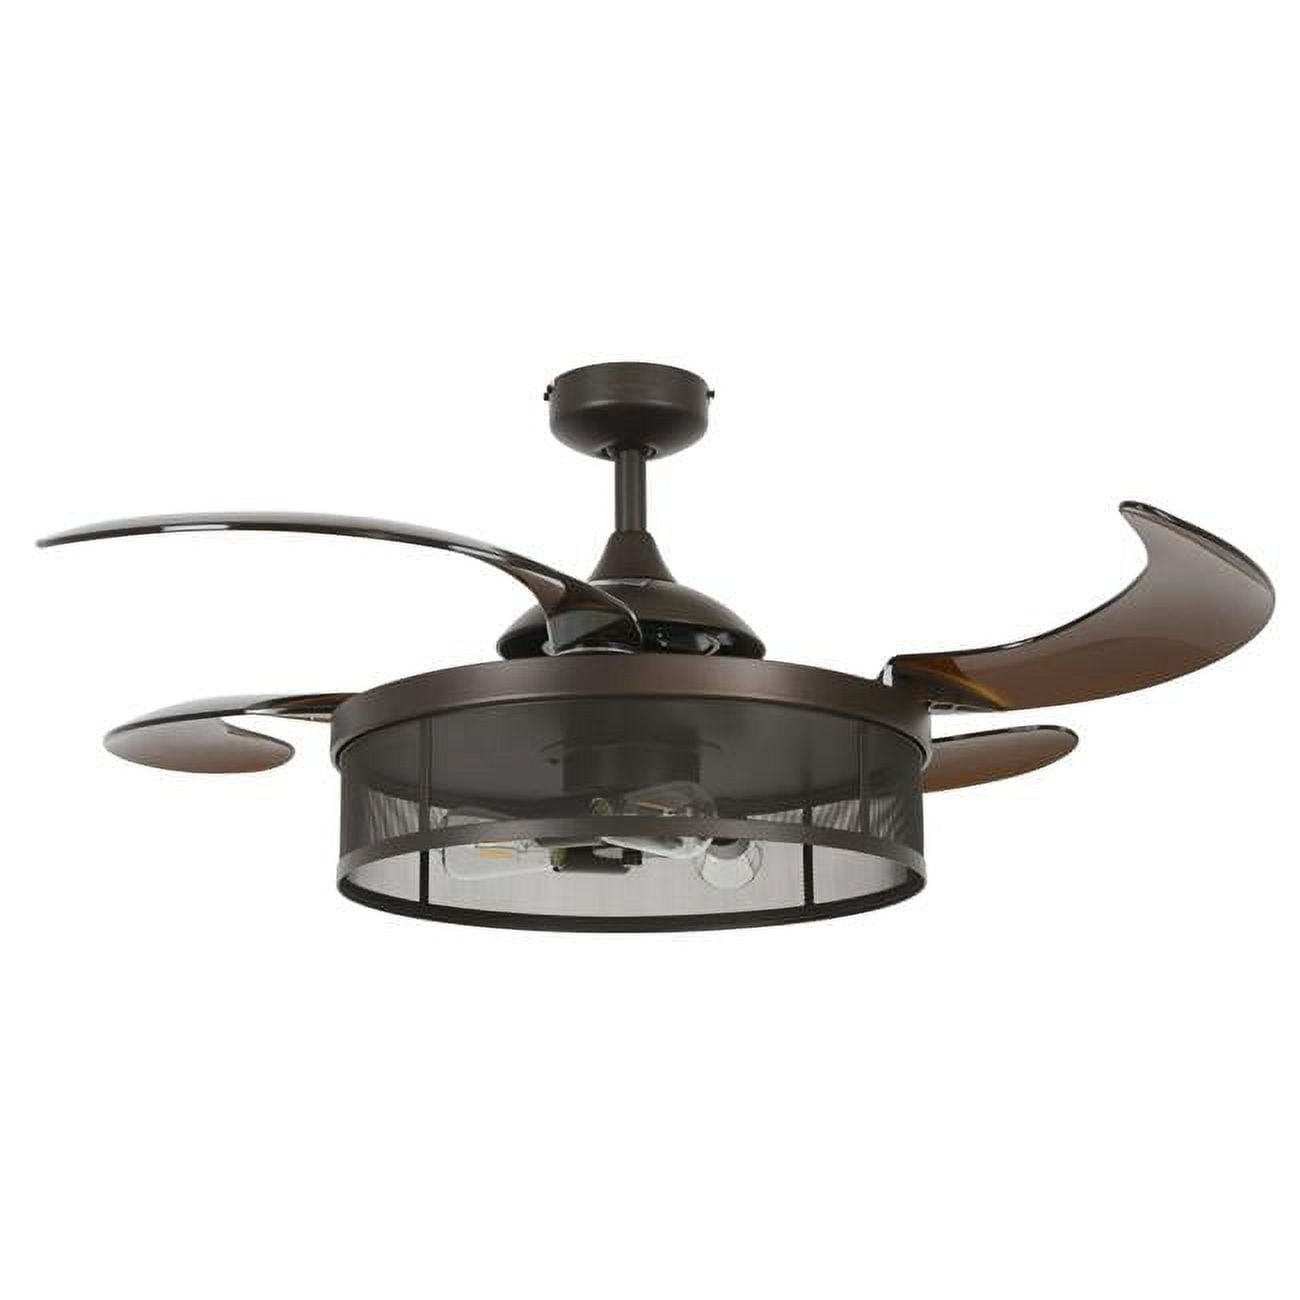 Picture of Fanaway 51107001 Meridian 48-inch Oil Rubbed Bronze and Amber AC Ceiling Fan with Light